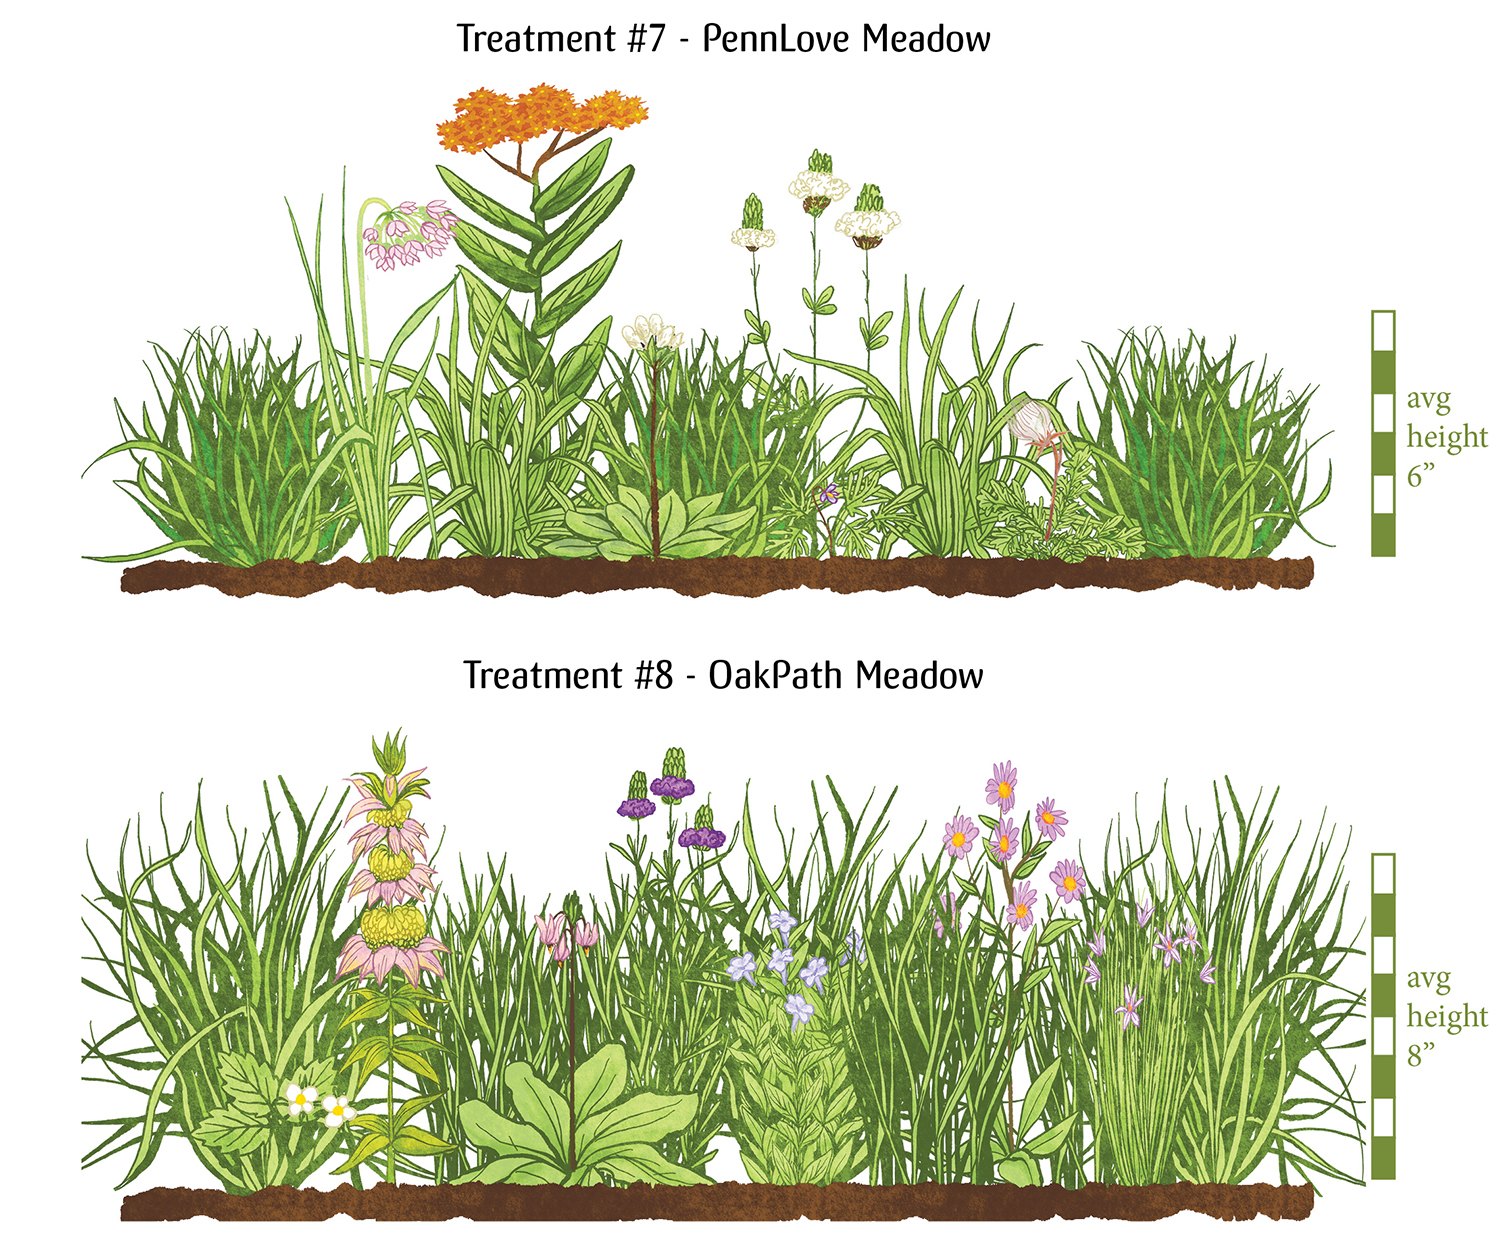 Image: Treatment #7 PennLove Meadow and #8 OakPath Meadow, two different mixes of sedge grasses and native prairie flowering plants, blooming in oranges, pinks, purples, and whites. They average around 7 inches tall.